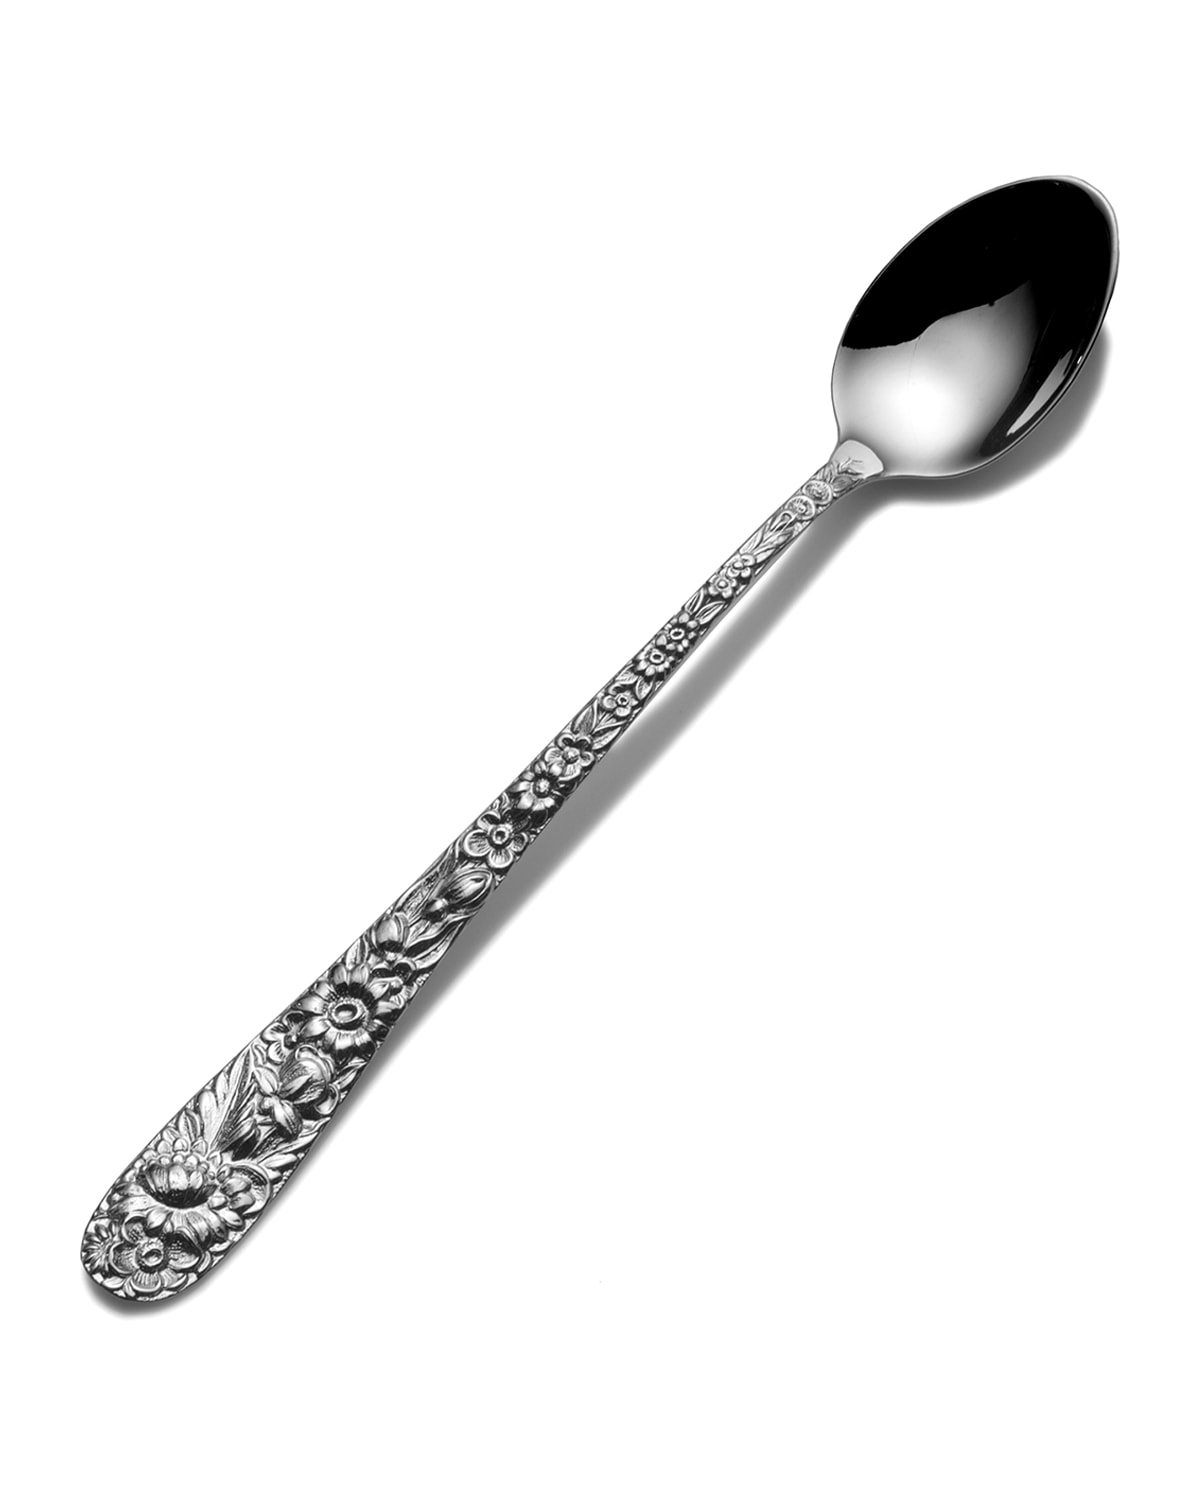 Shop Empire Silver Repousse Infant Feeding Spoon In Silver